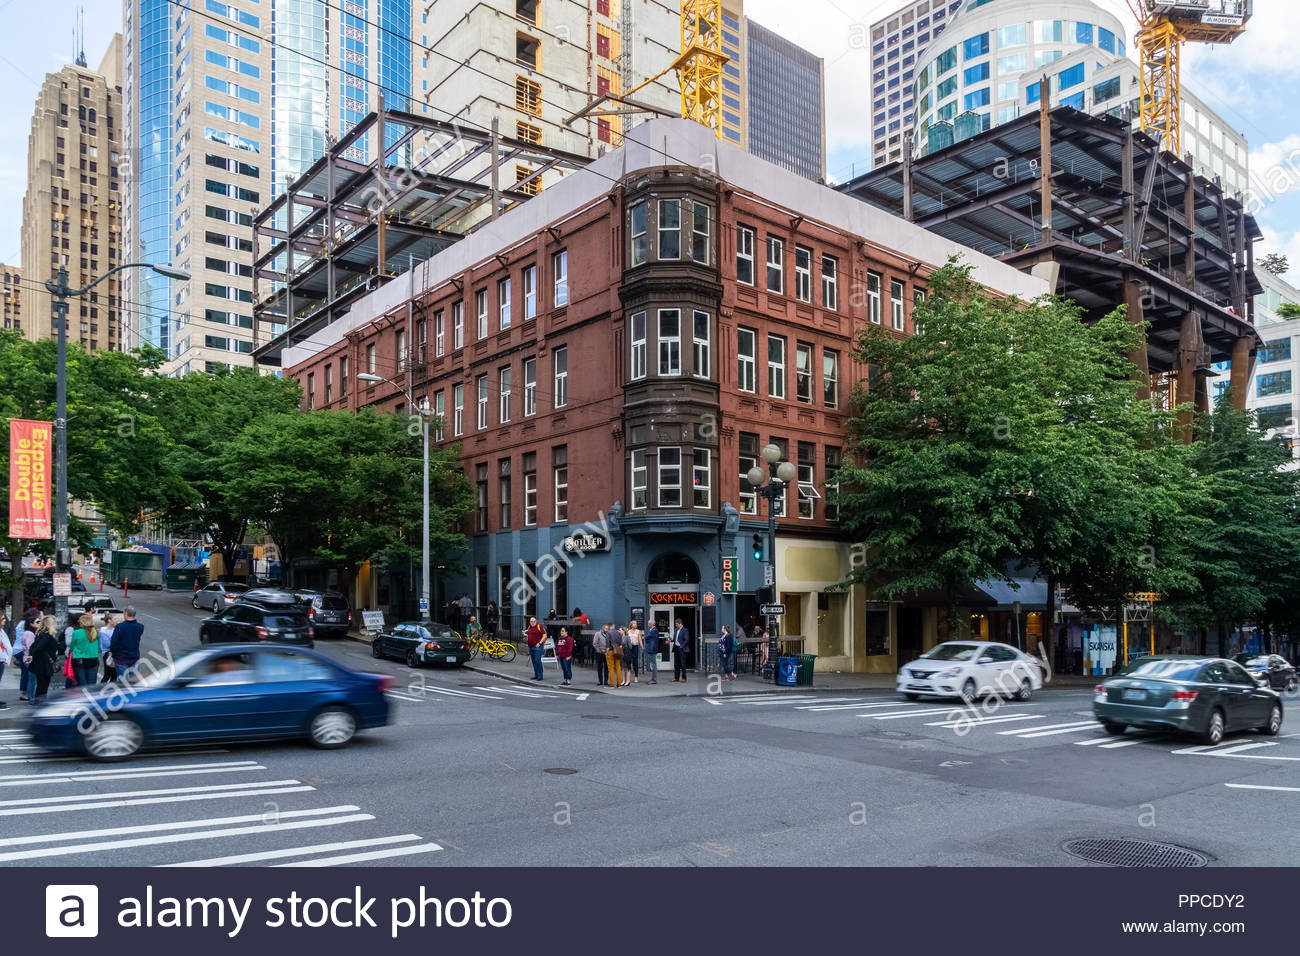 historic-brick-building-of-the-former-diller-hotel-located-on-1st-avenue-in-downtown-seattle-with-construction-site-of-the-skanska-2u-skyscraper-usa-PPCD